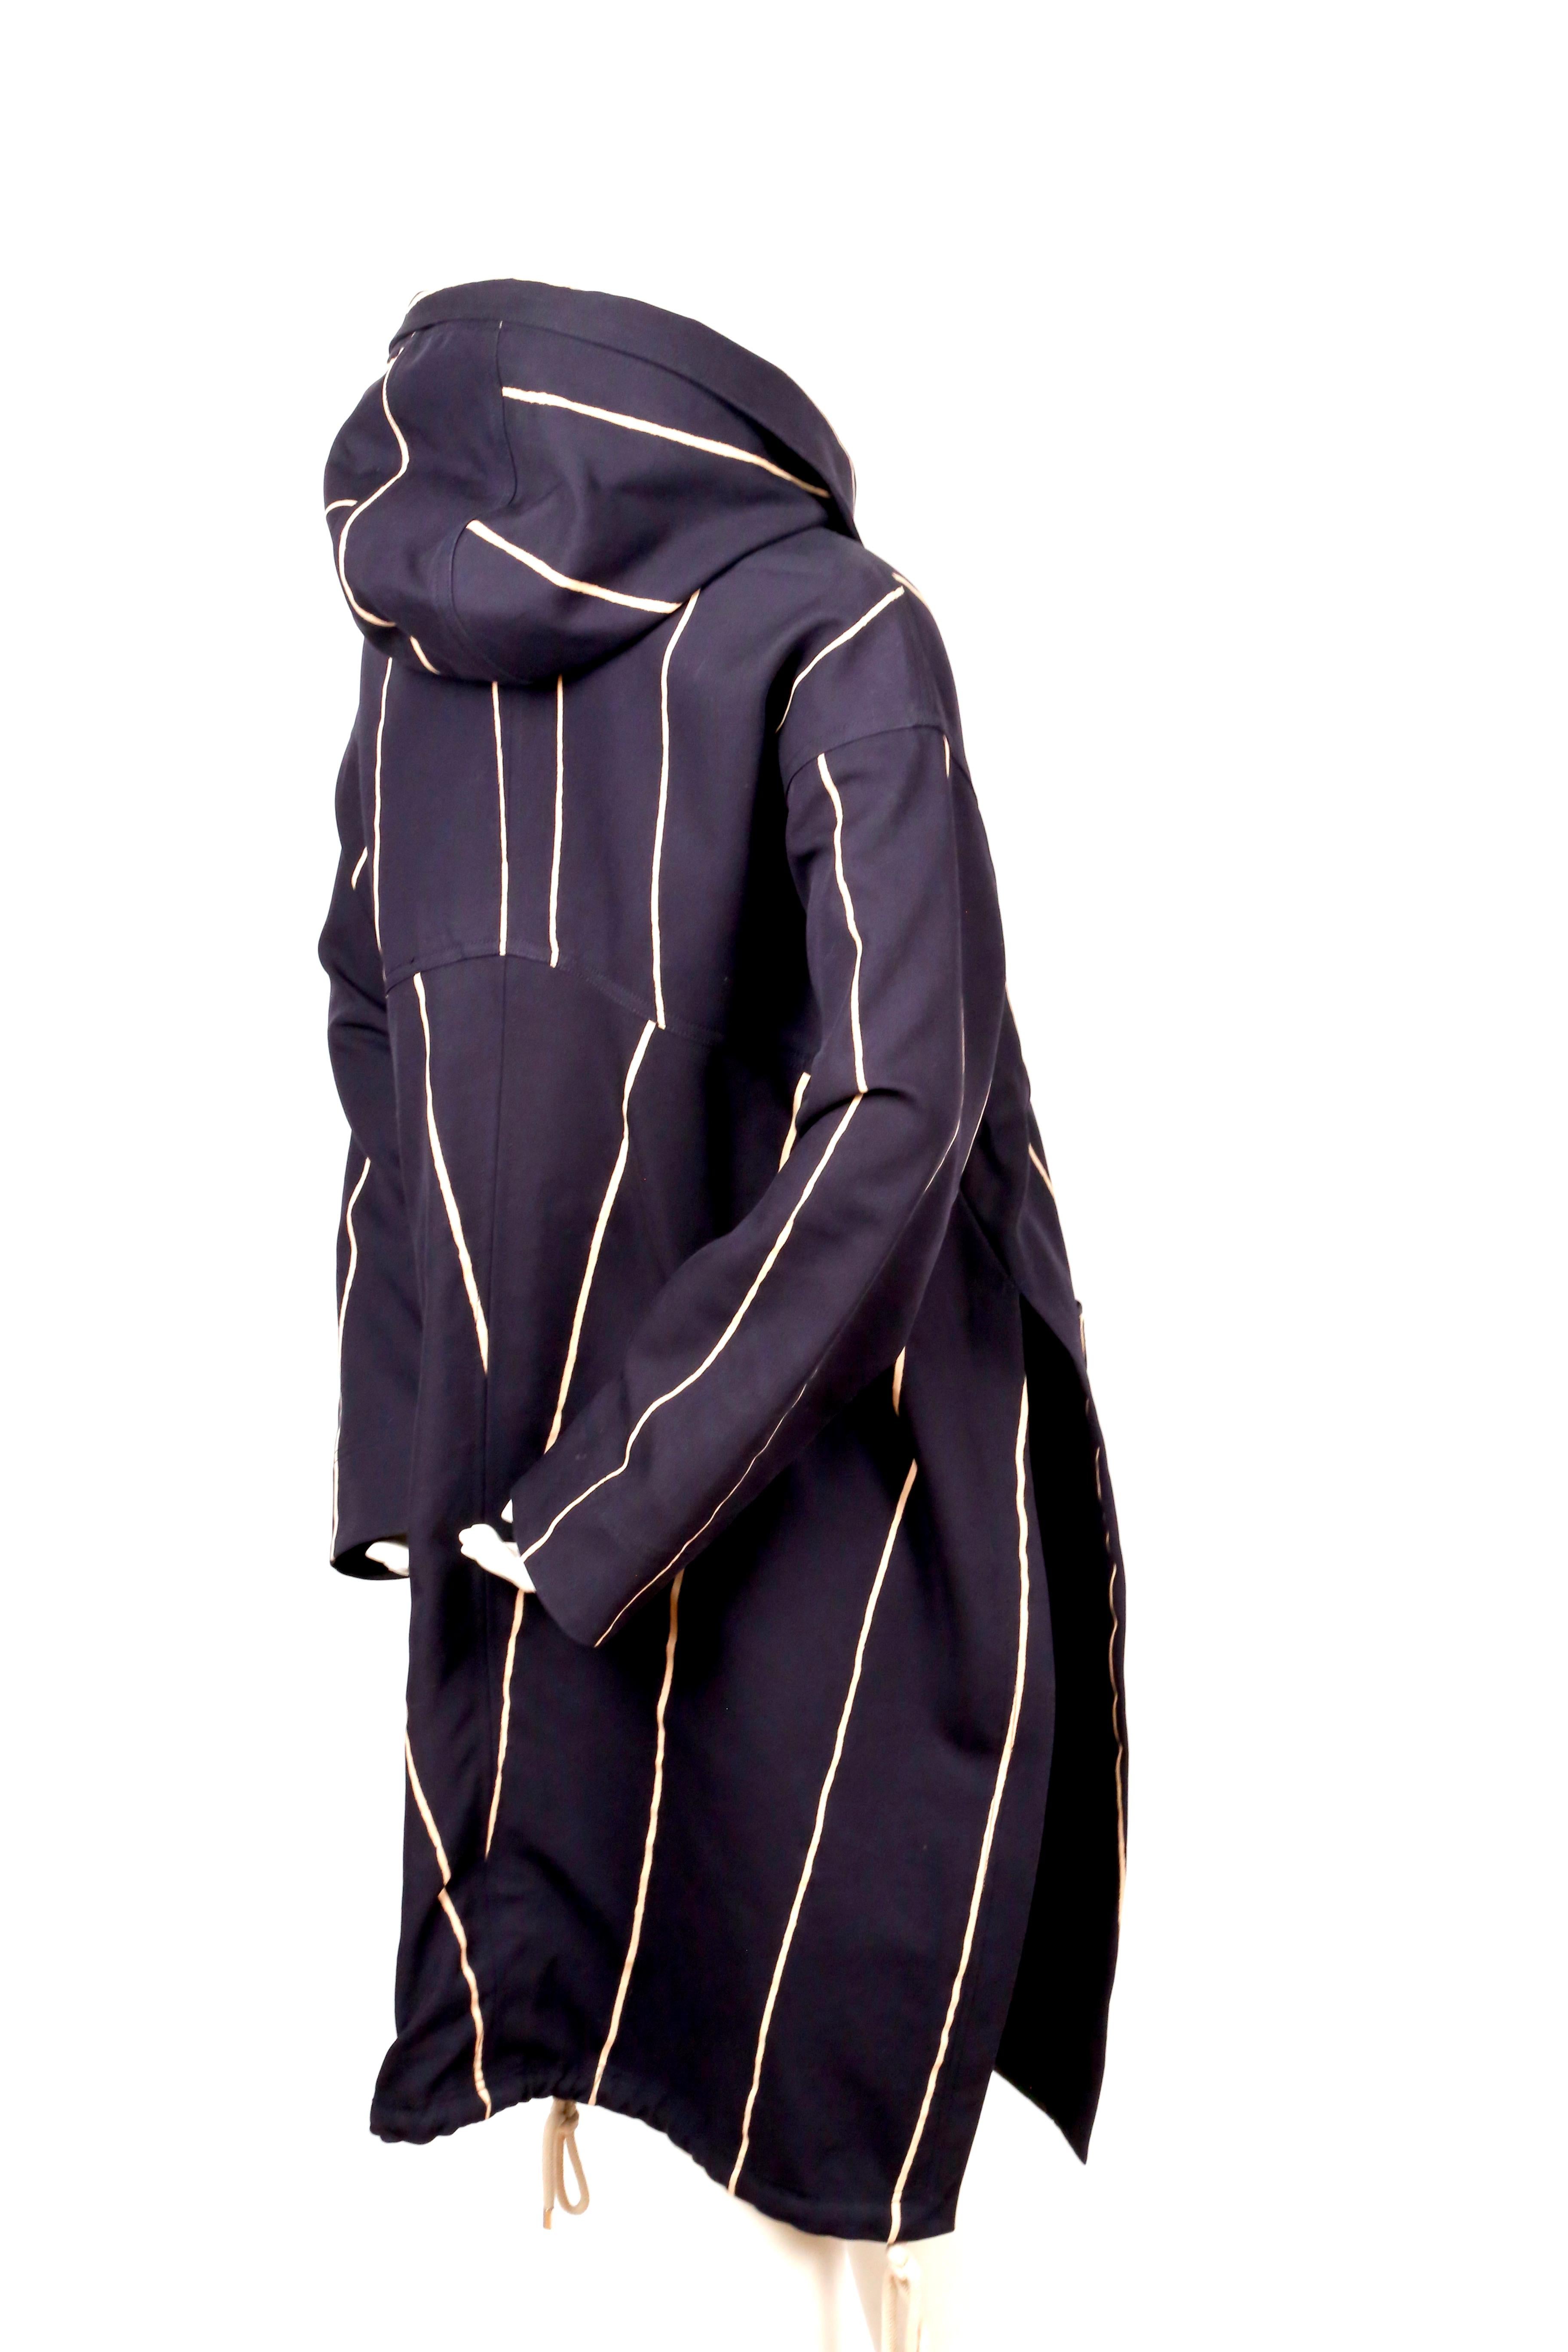 CELINE by PHOEBE PHILO navy draped coat with hood - resort 2016 For Sale 1